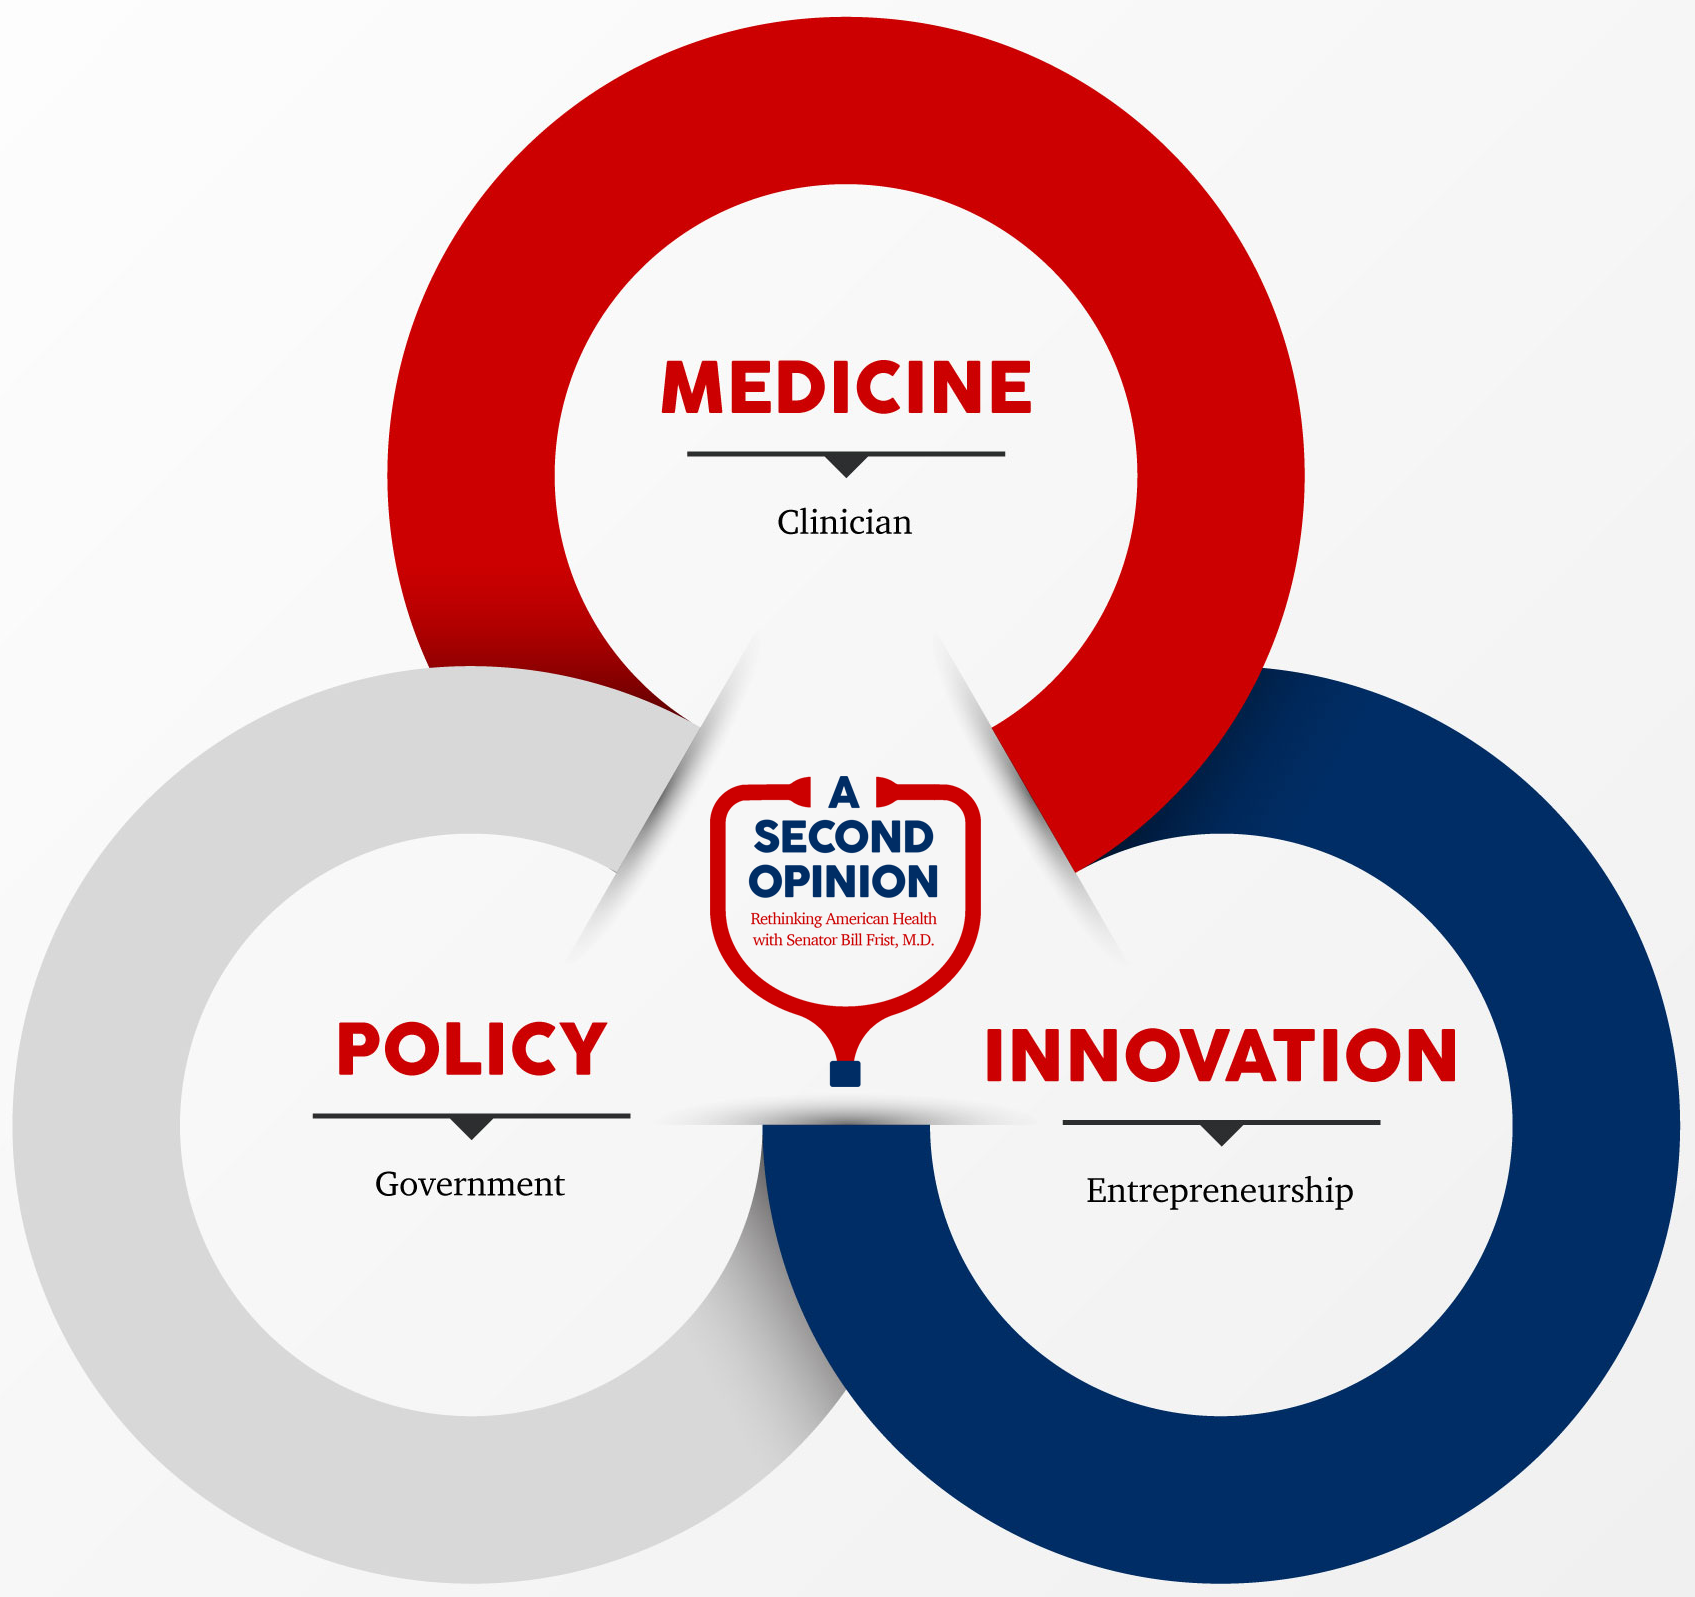 A Second Opinion Healthcare Podcast Nexus on Policy, Medicine, Innovation.